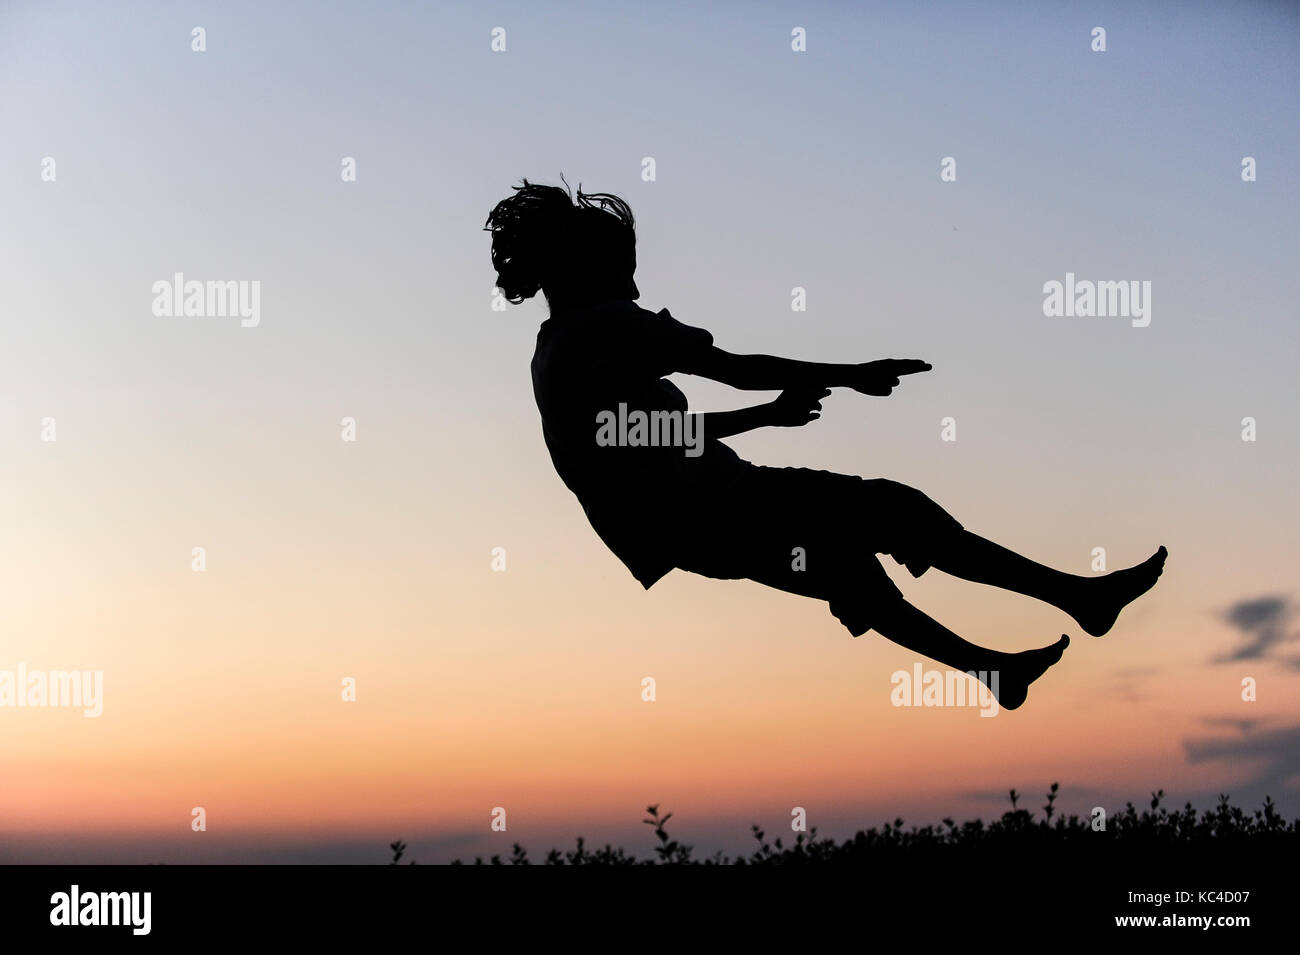 Germany, boy jumping on trampoline, Silhouette Stock Photo